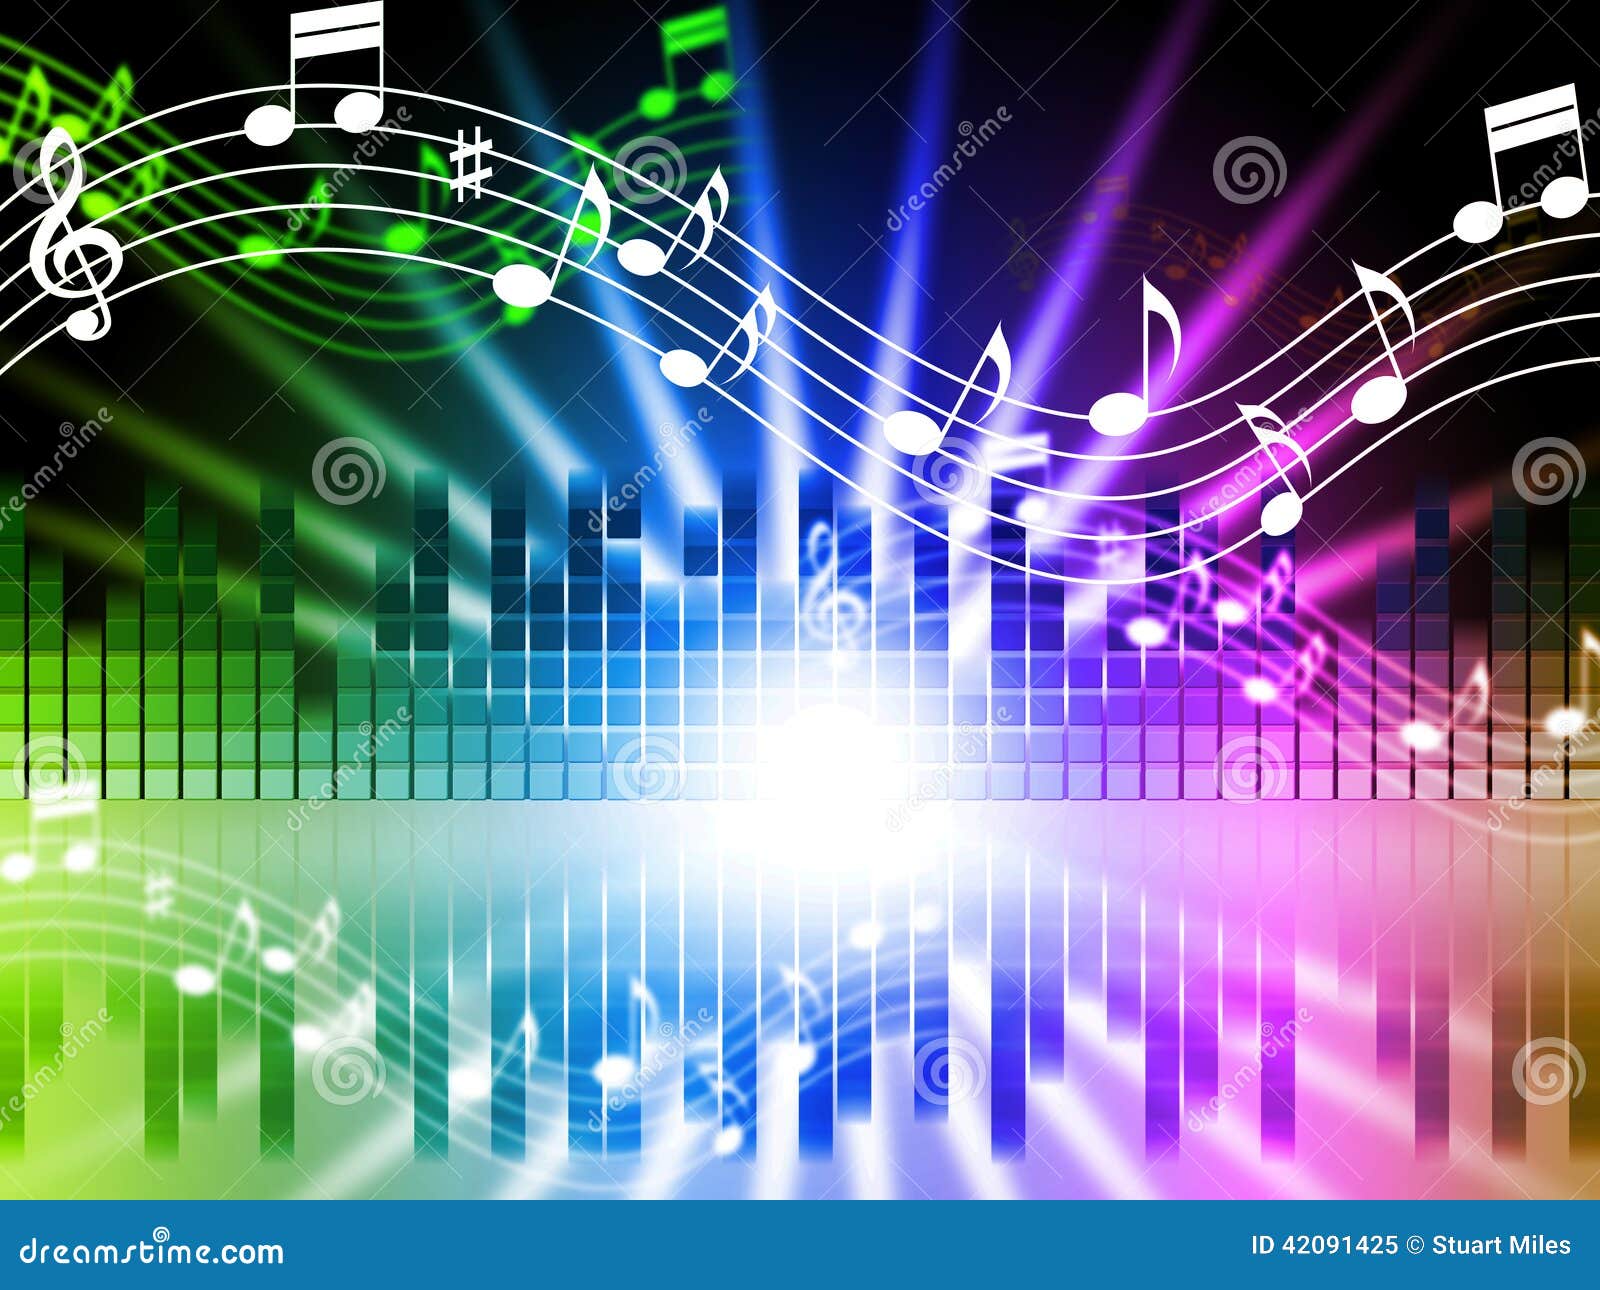 Details 200 background music for singing song